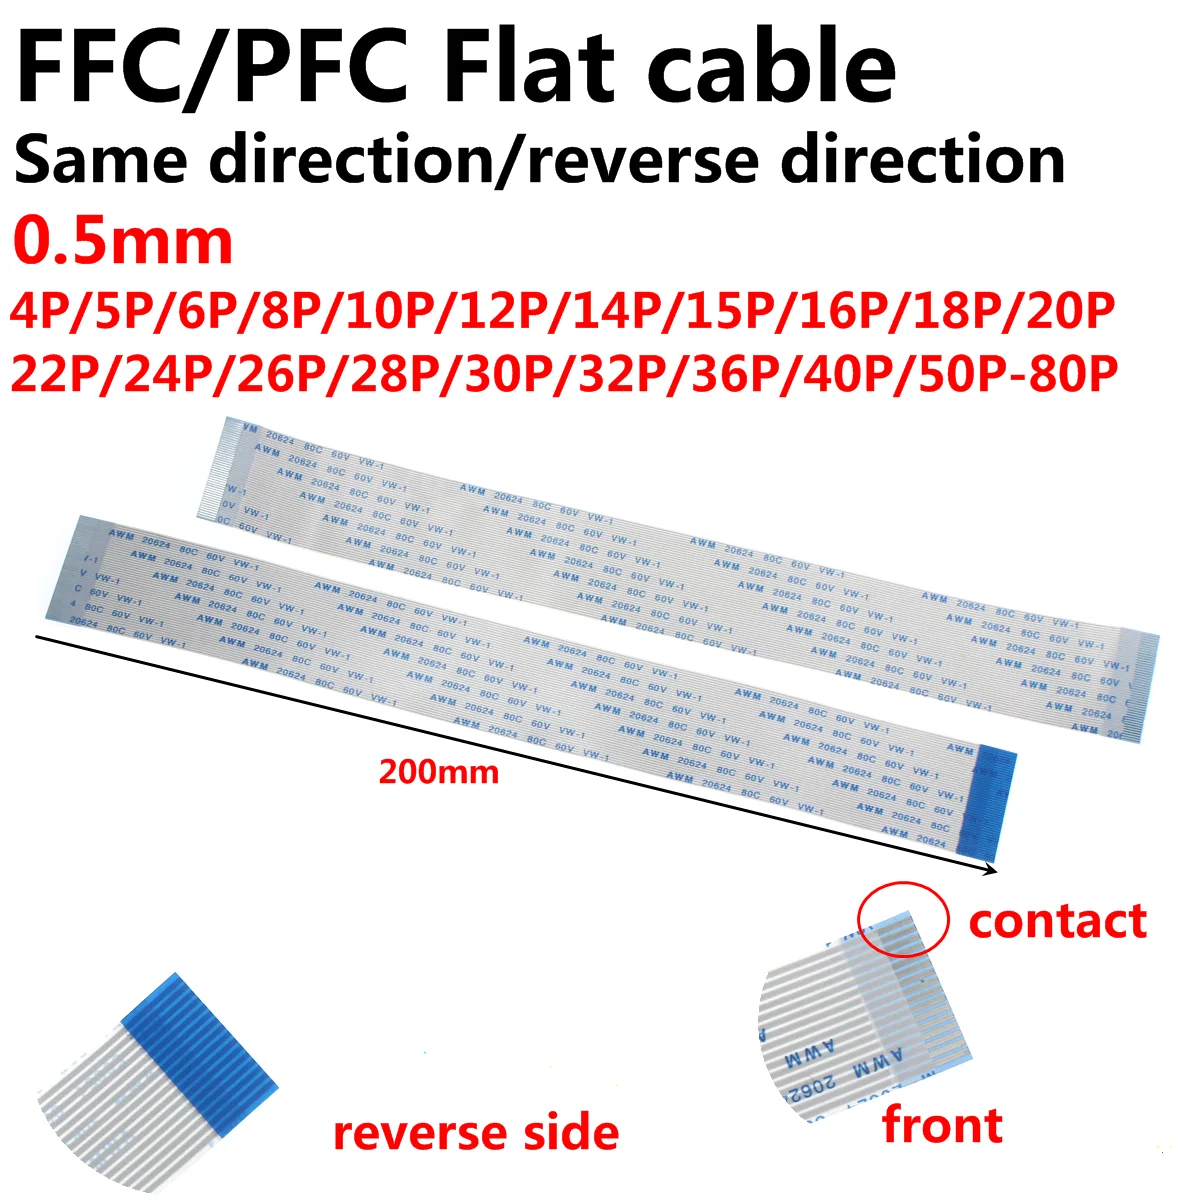 20Pcs FPC Flexible Flat Cable FFC 0.5MM 200MM 20cm A B type interface 4P 5P 6P 8P 10P 12P 14P 16P 18P 20P 22P 24P-40P 15cm dorten usb type c to usb cable flat series 1 м red